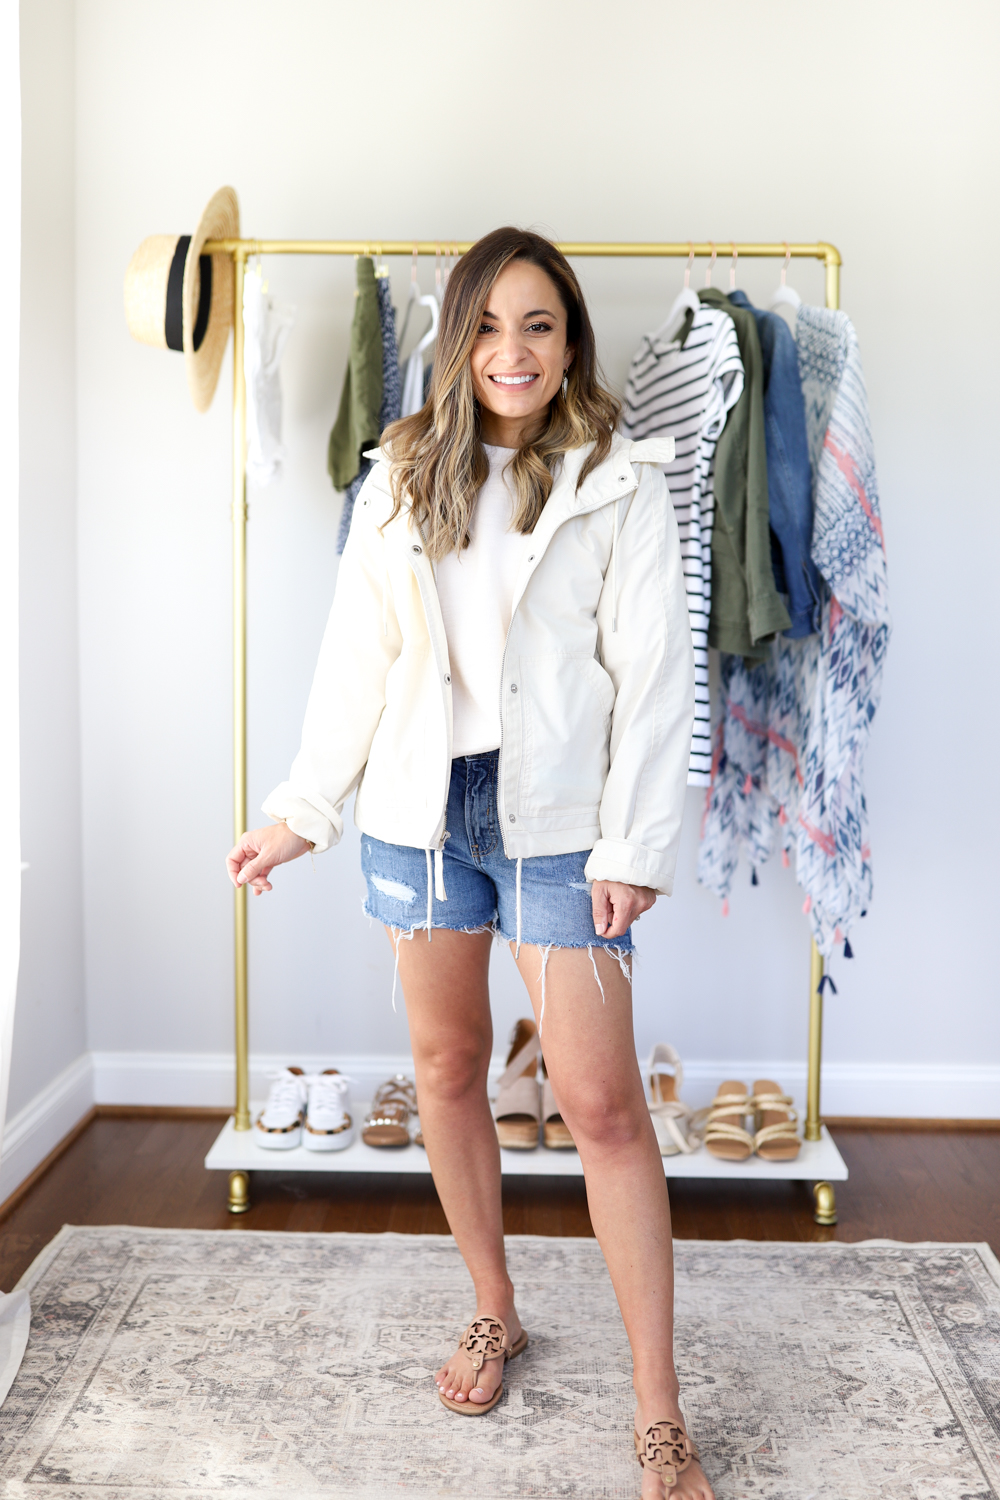 Spring Capsule Wardrobe: 30 Cozy, Flattering Pieces for the Busy SAHM -  AbsolutelyCourtney